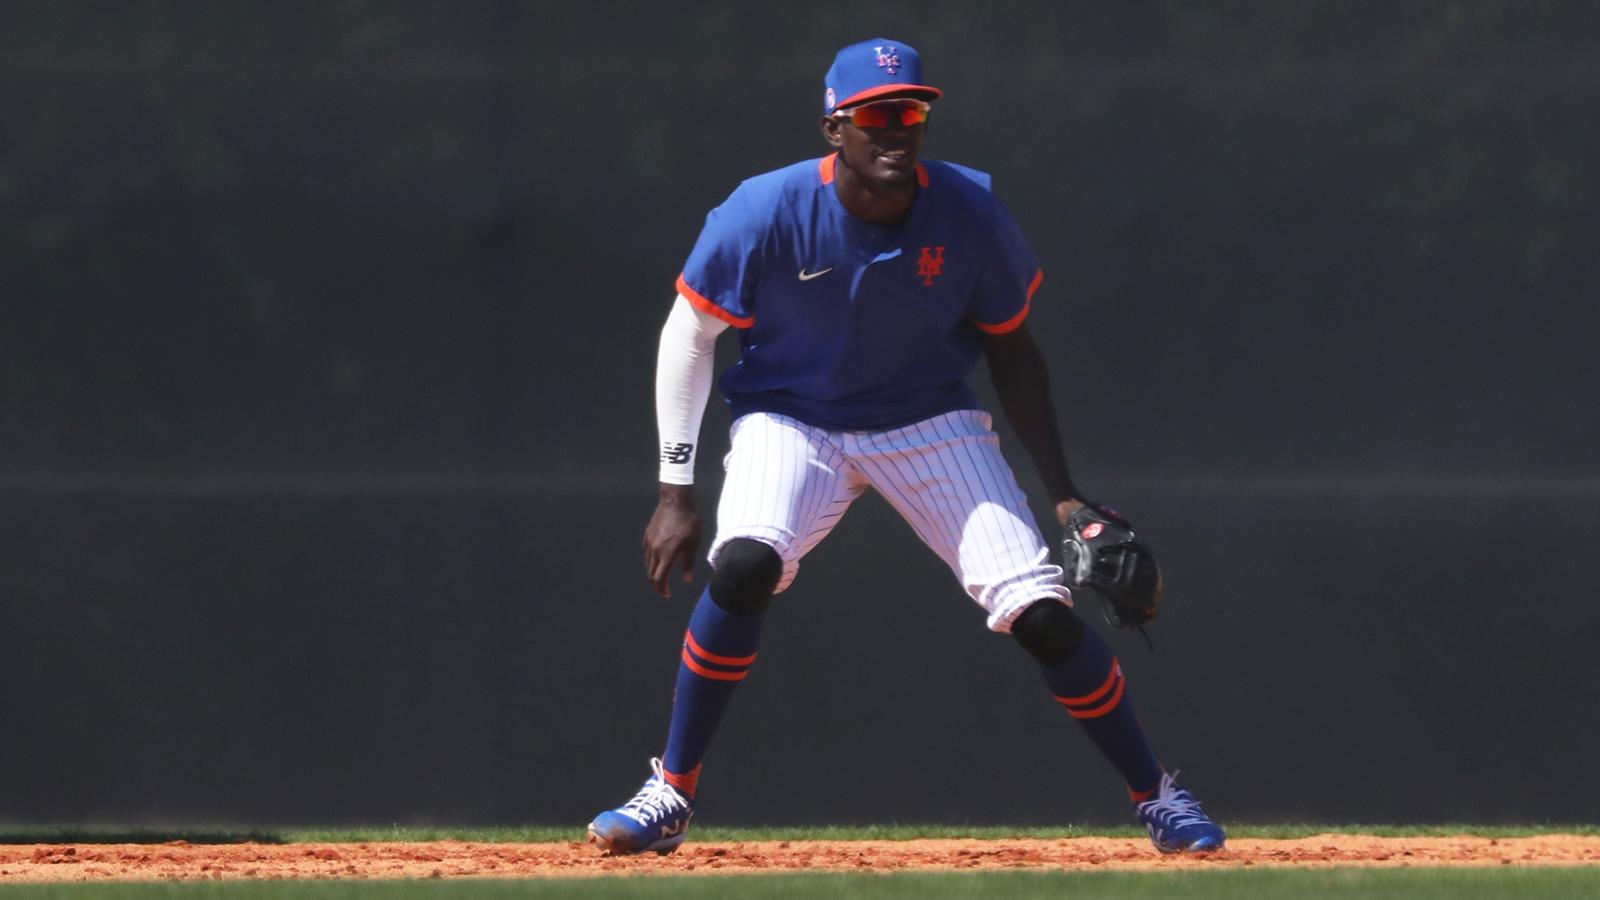 Mets prospect Ronny Mauricio in the field at 2021 spring training in Port St. Lucie, Fla. / Rob Carbuccia/SNY